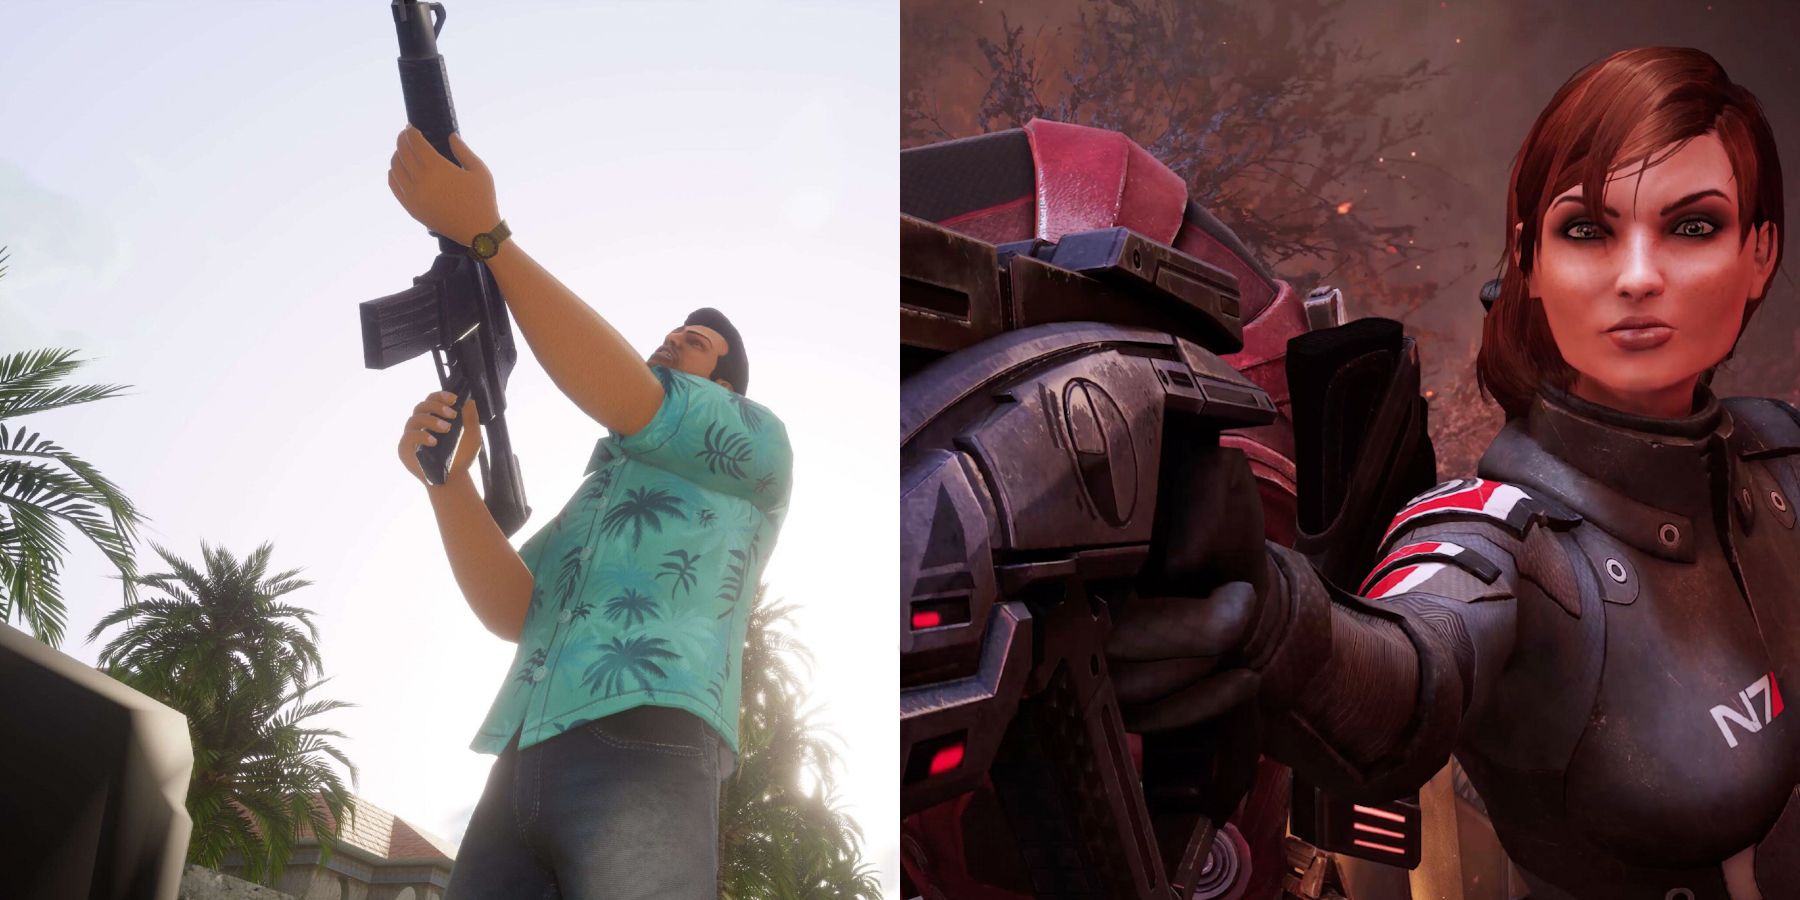 GTA Trilogy Disaster Shows How Mass Effect Did Things Right